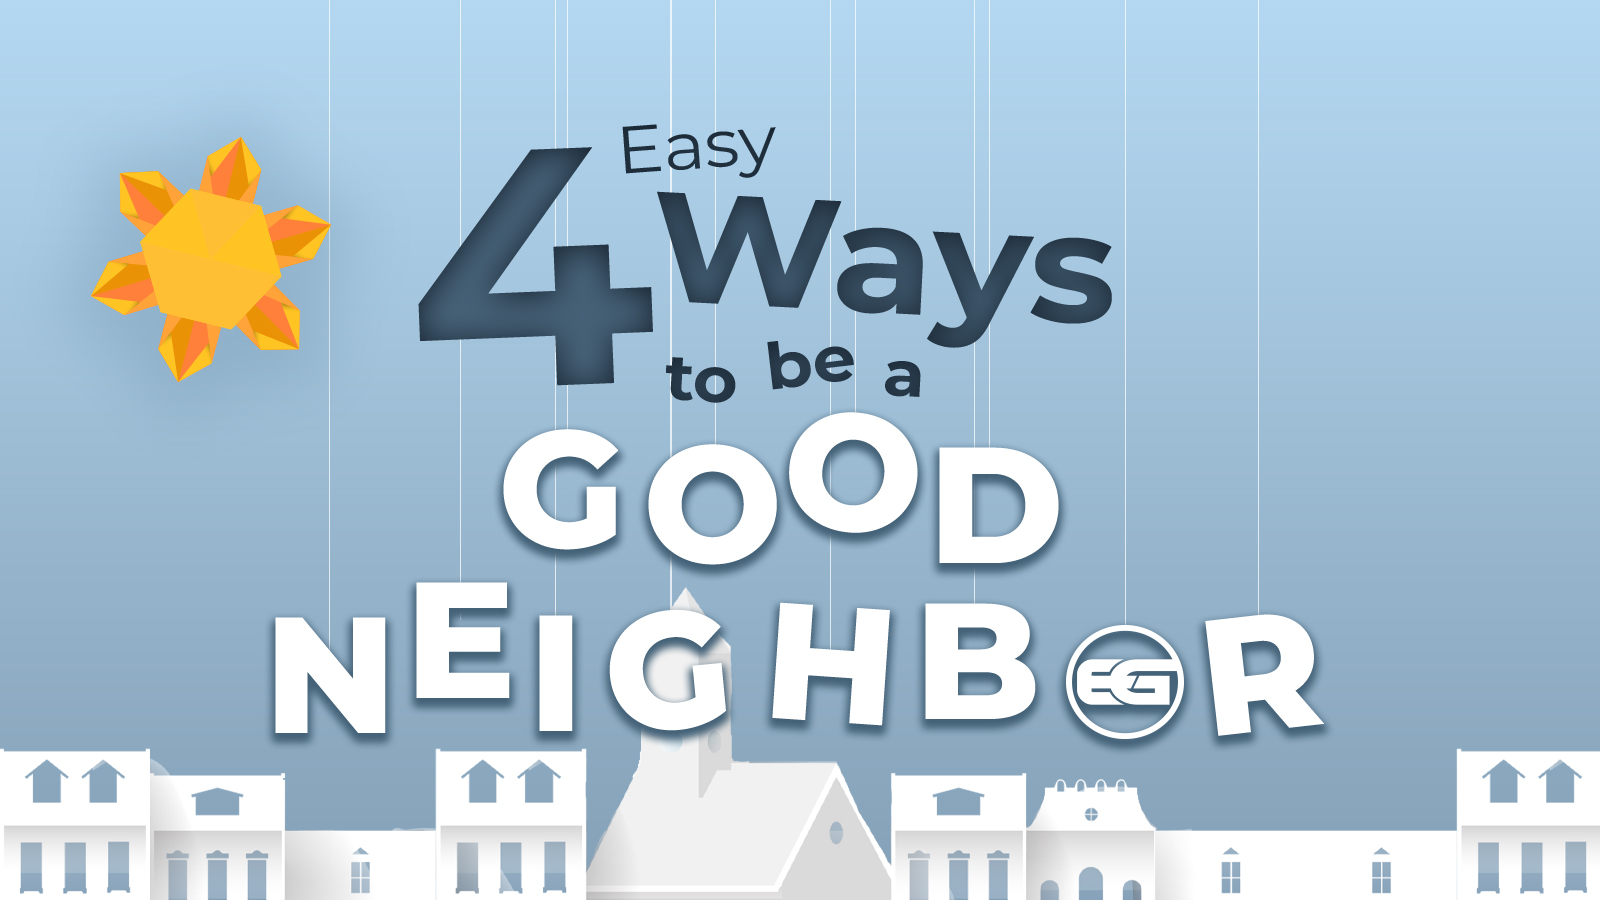 How to Be a Good Neighbor